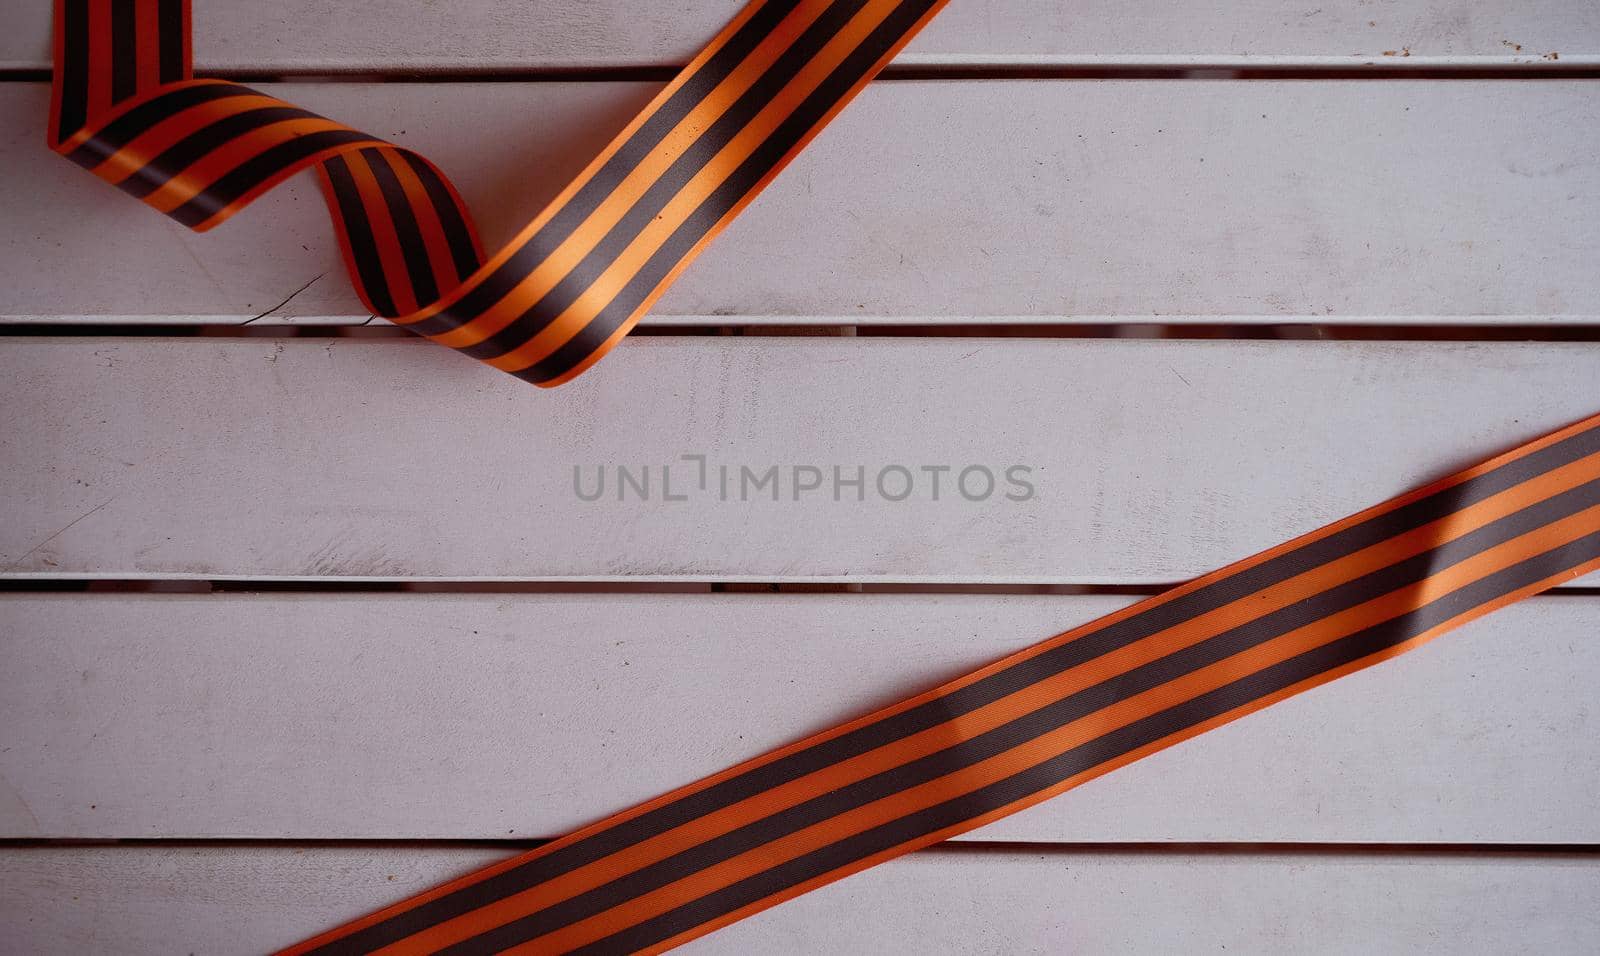 Folded St. George ribbon on a wooden background. High quality photo